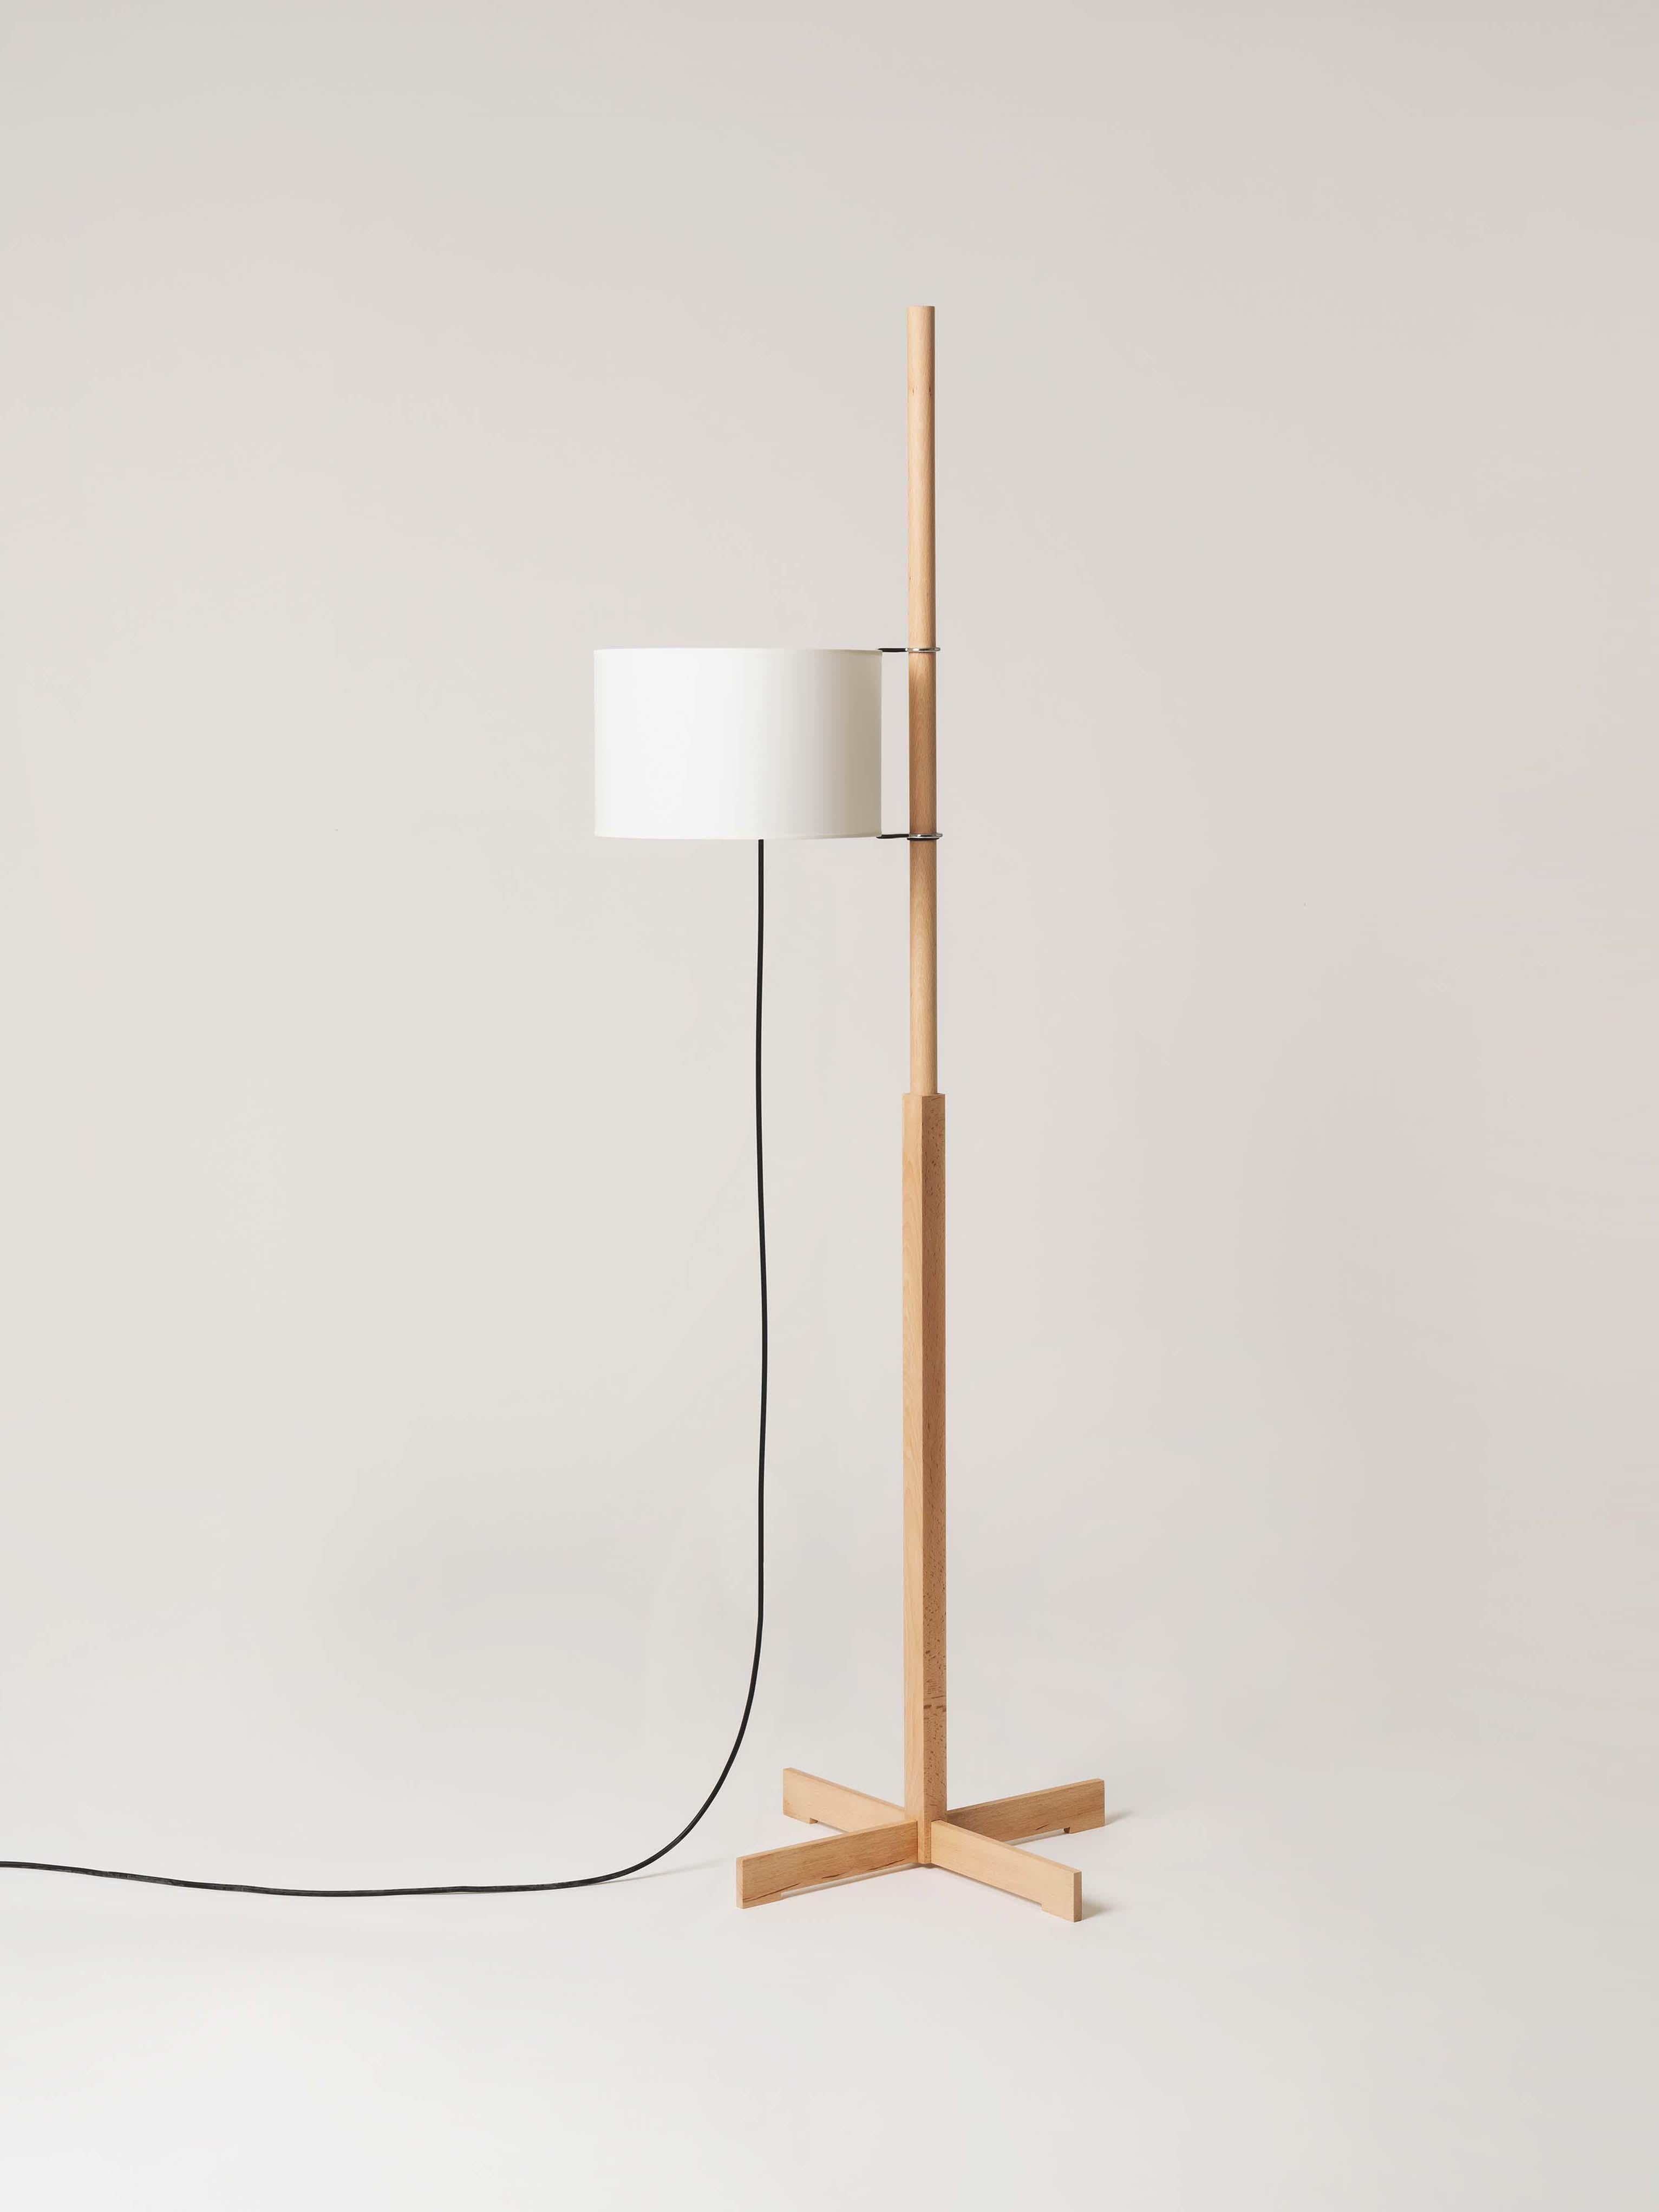 White and beech TMM floor lamp by Miguel Milá
Dimensions: D 50 x W 60 x H 166 cm
Materials: Beech wood, parchment lampshade.
Available in 3 lampshades: beige, white and white with diffuser.
Available in 5 woods: beech, cherry, walnut, natural